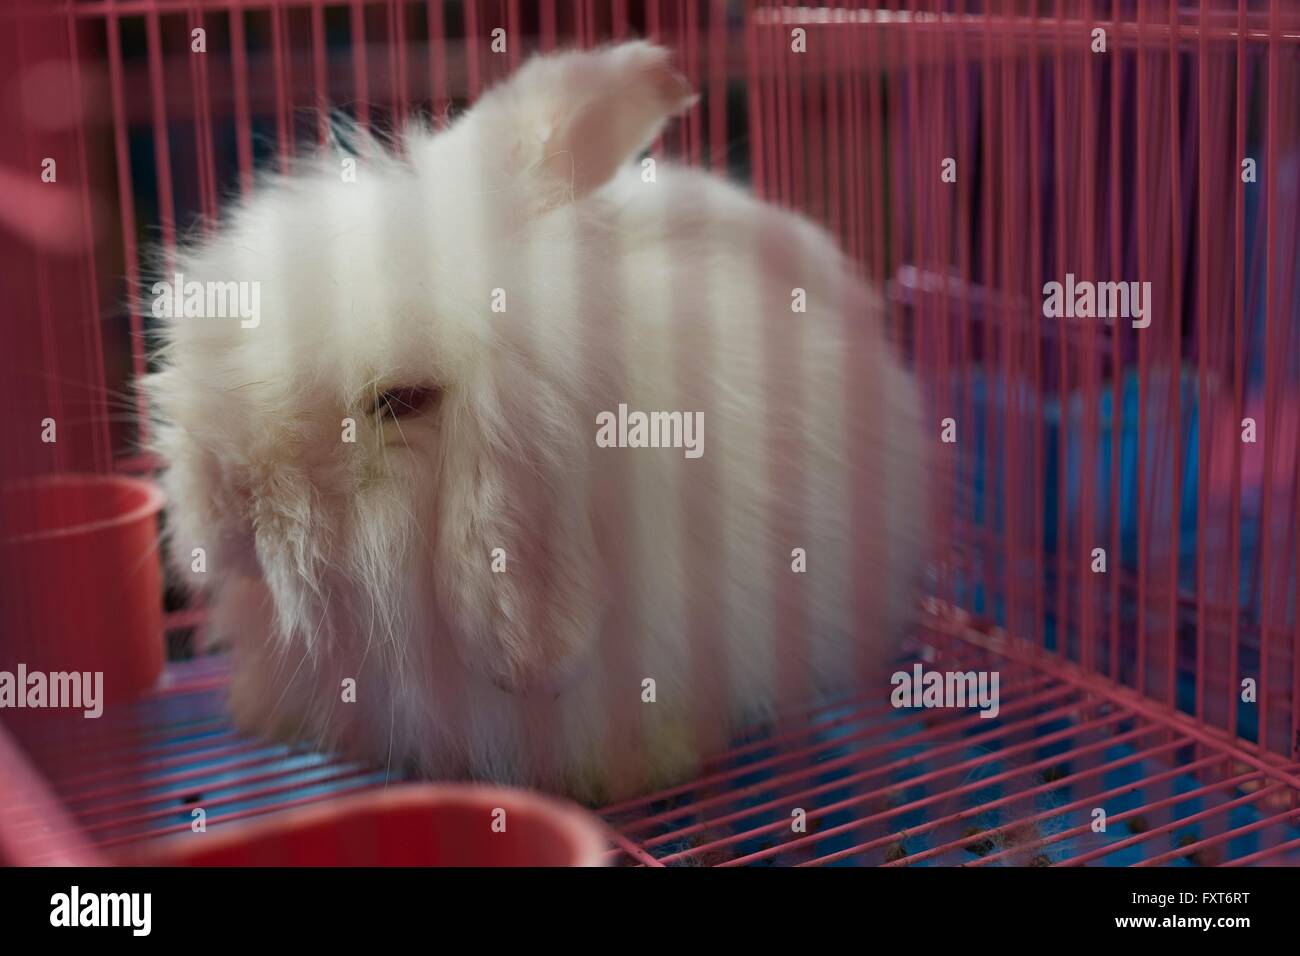 Fluffy white rabbit in cage at Shanghai Bird and Flower Market, China Stock Photo